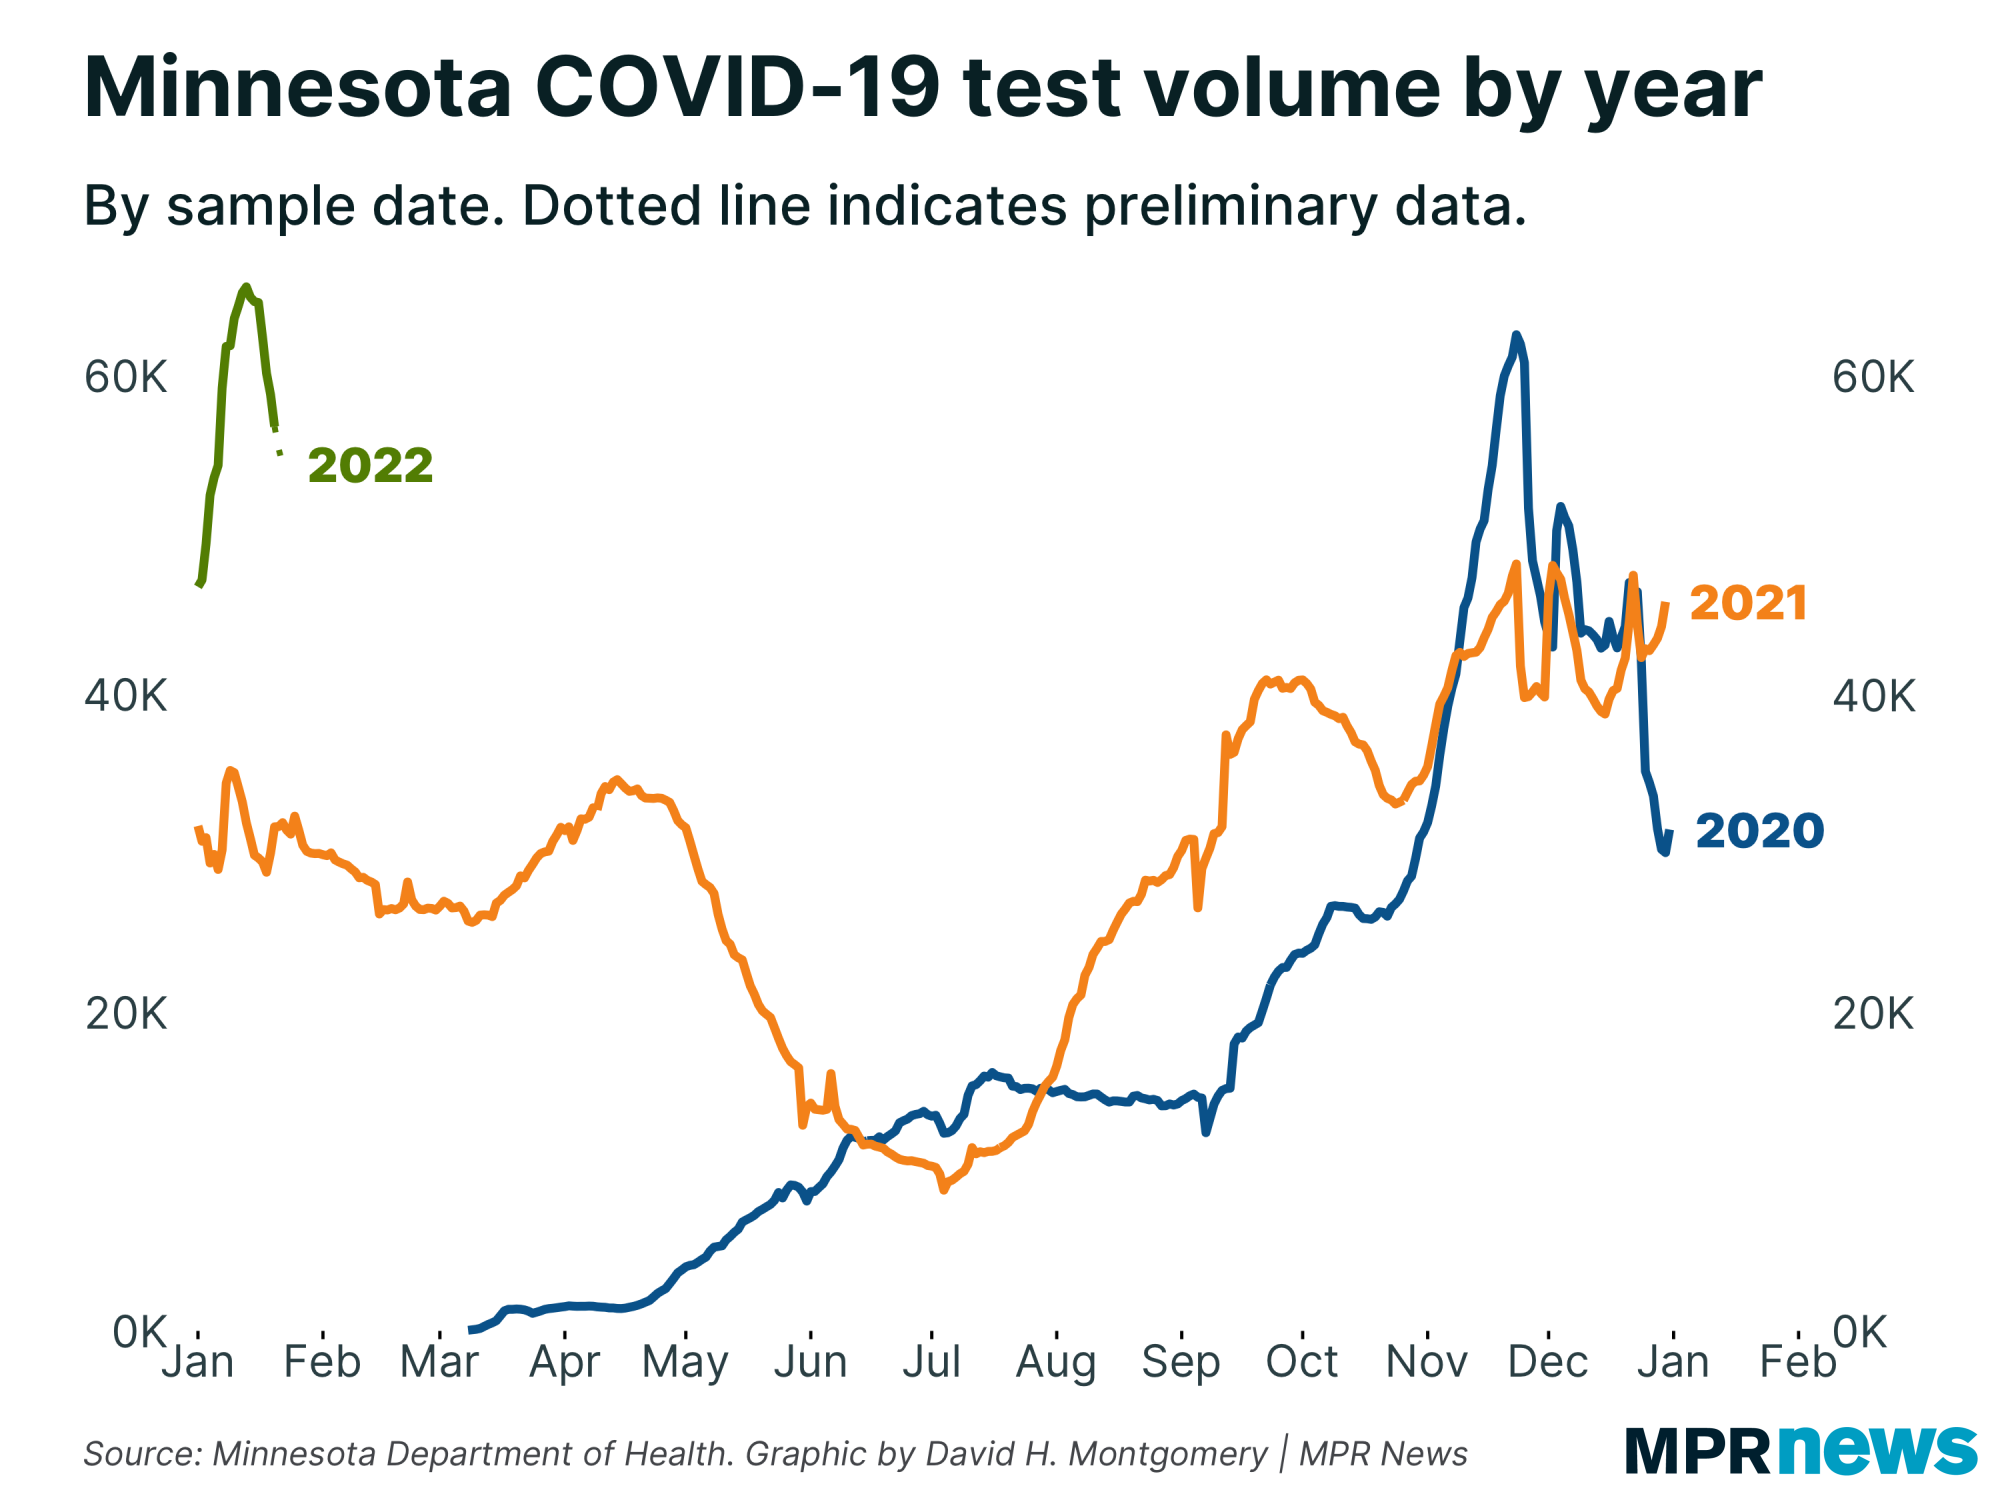 Graph of Minnesota's COVID-19 tests by year by sample date